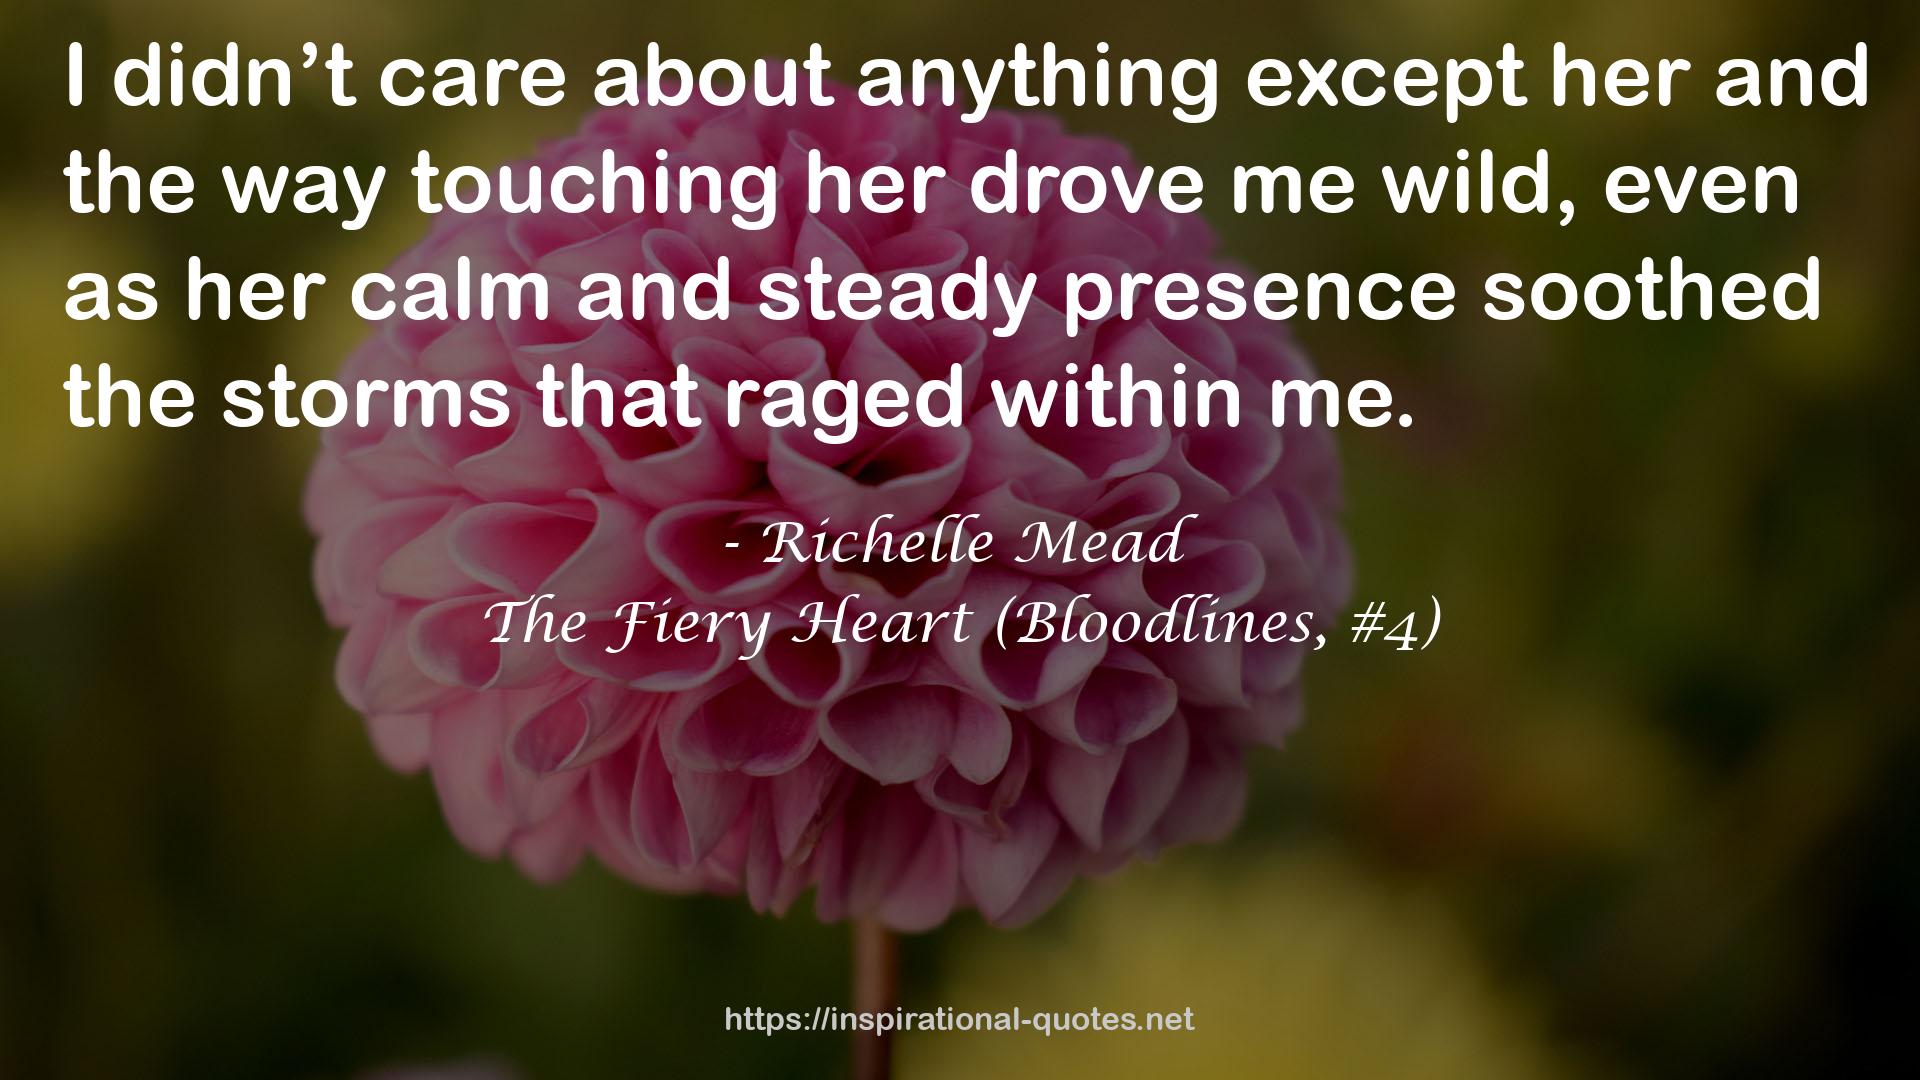 The Fiery Heart (Bloodlines, #4) QUOTES